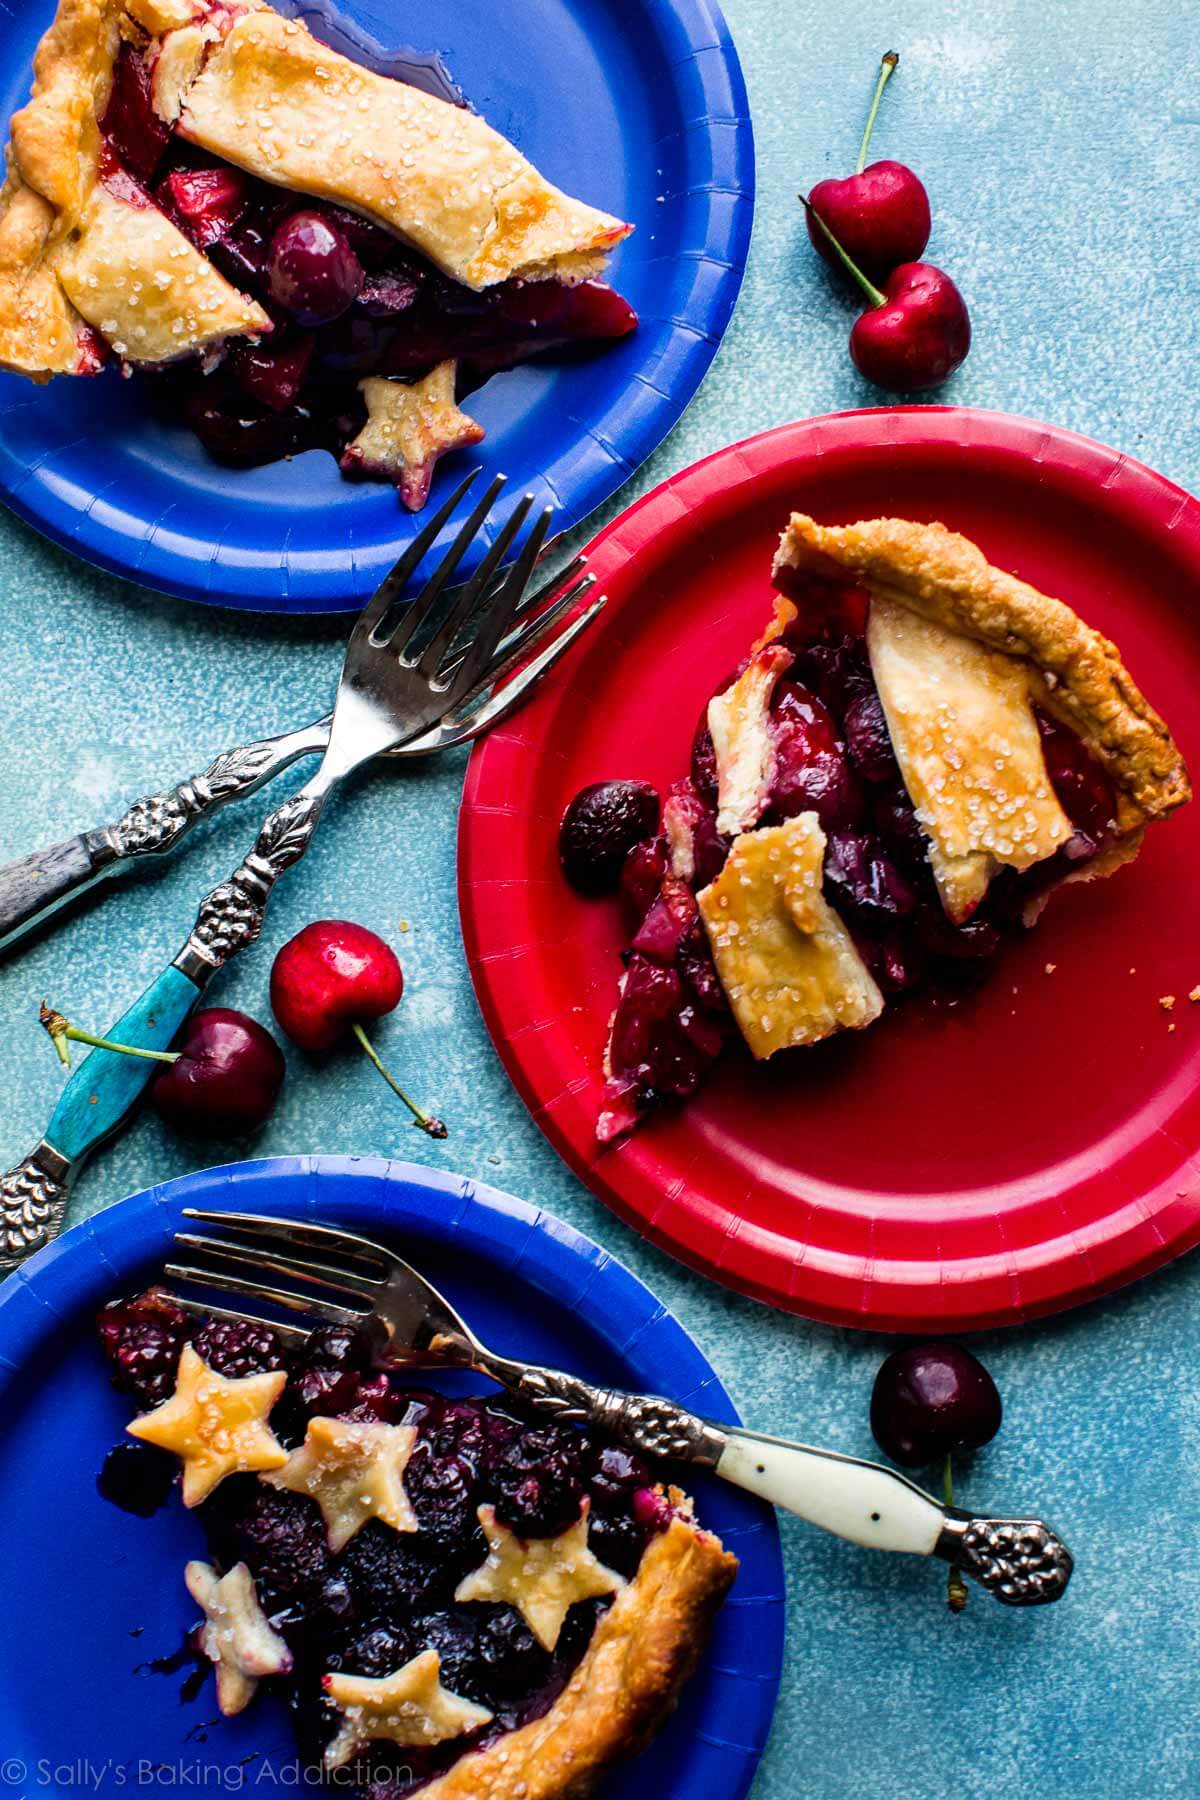 slices of American flag pie on red and blue plates